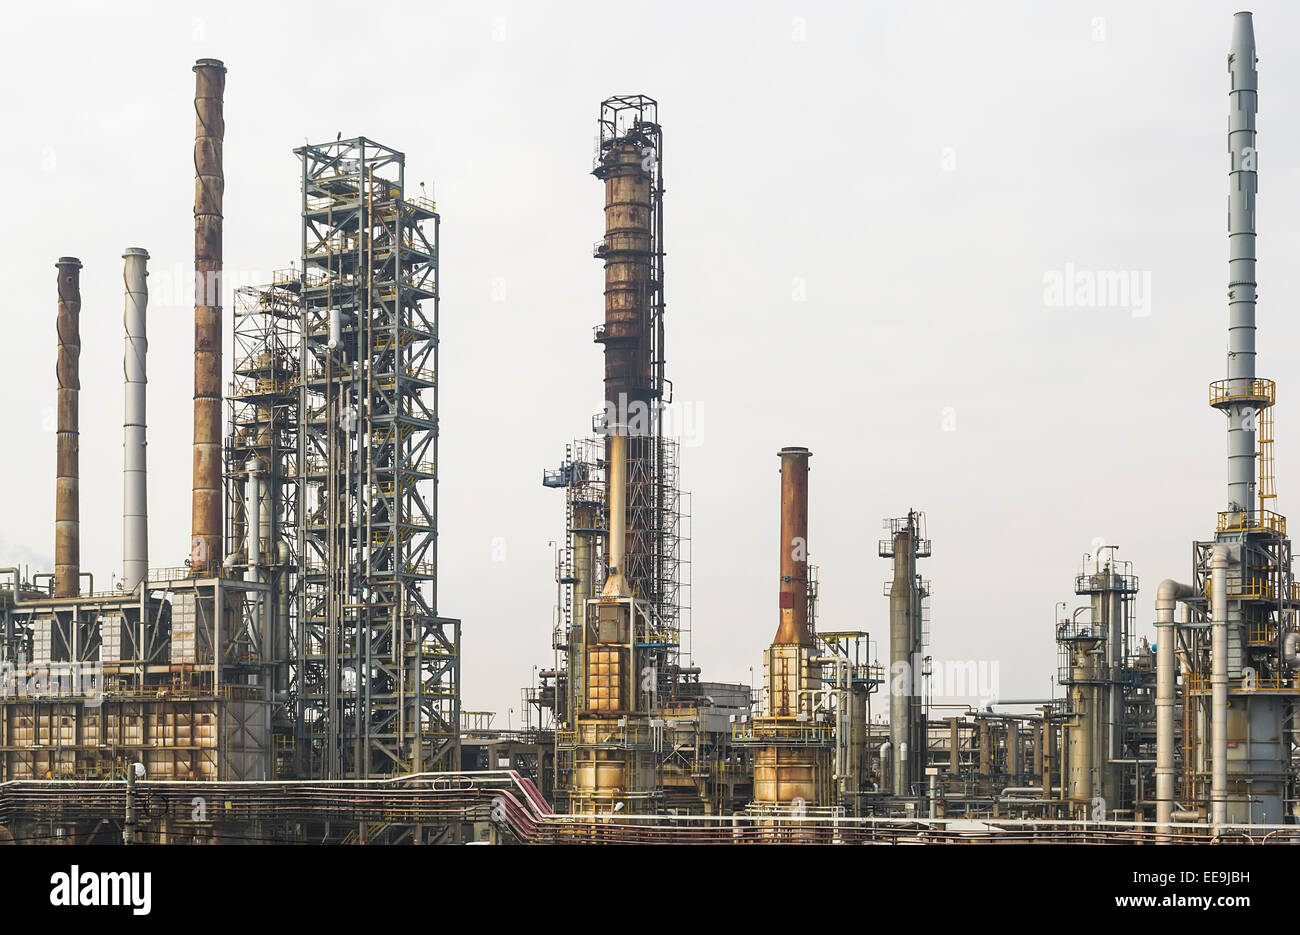 A part  of an oil and gas refinery with various petrochemical installations Stock Photo